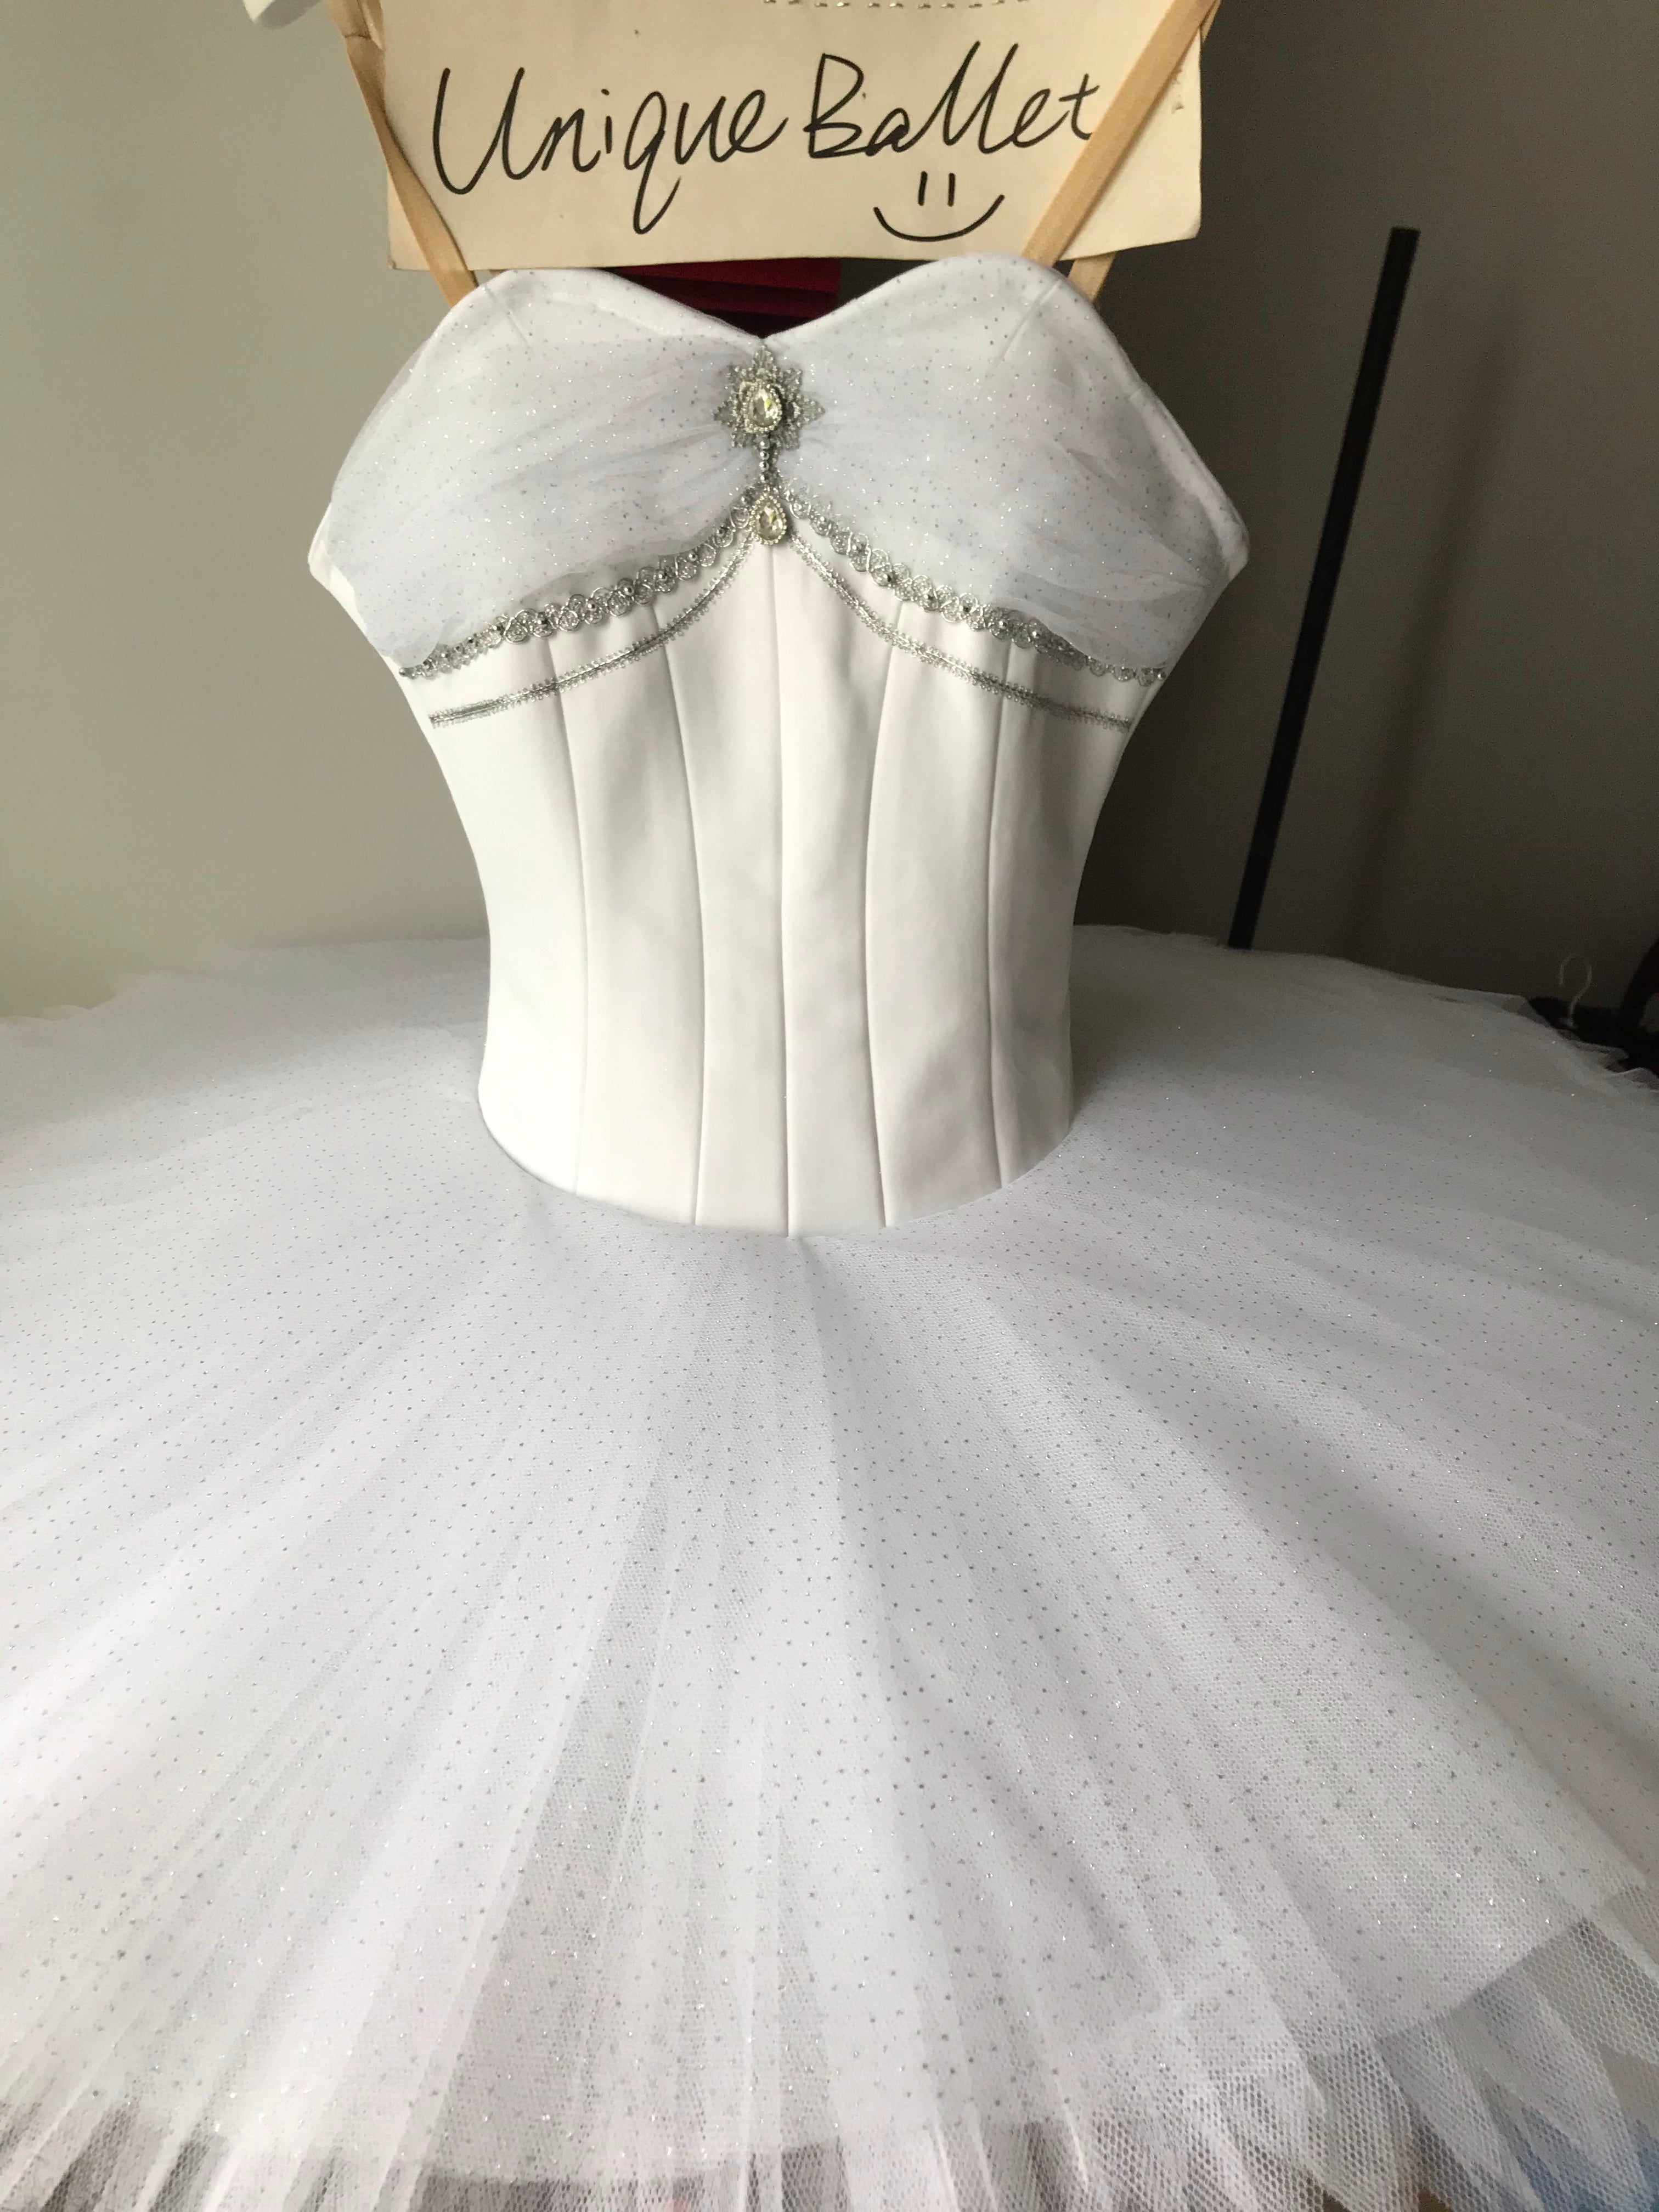 Professional White Ballet Tutu Costume For La Bayadère The Shade Classical Ballet TuTu Stage Dance Wear With Hooks